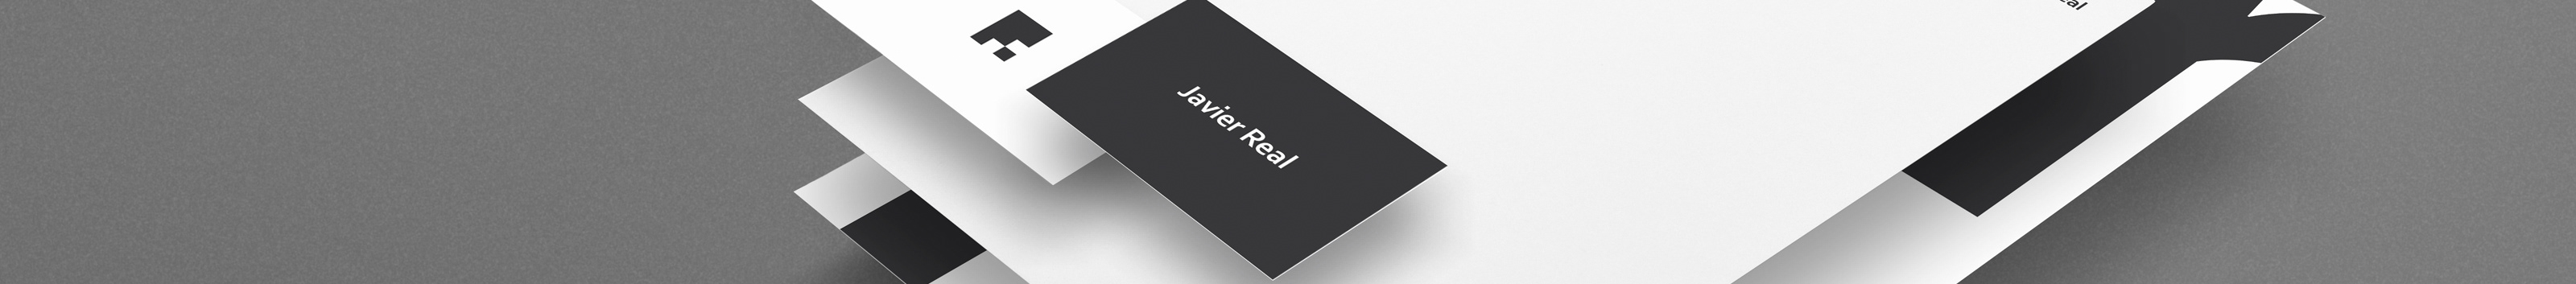 Javier Real's profile banner